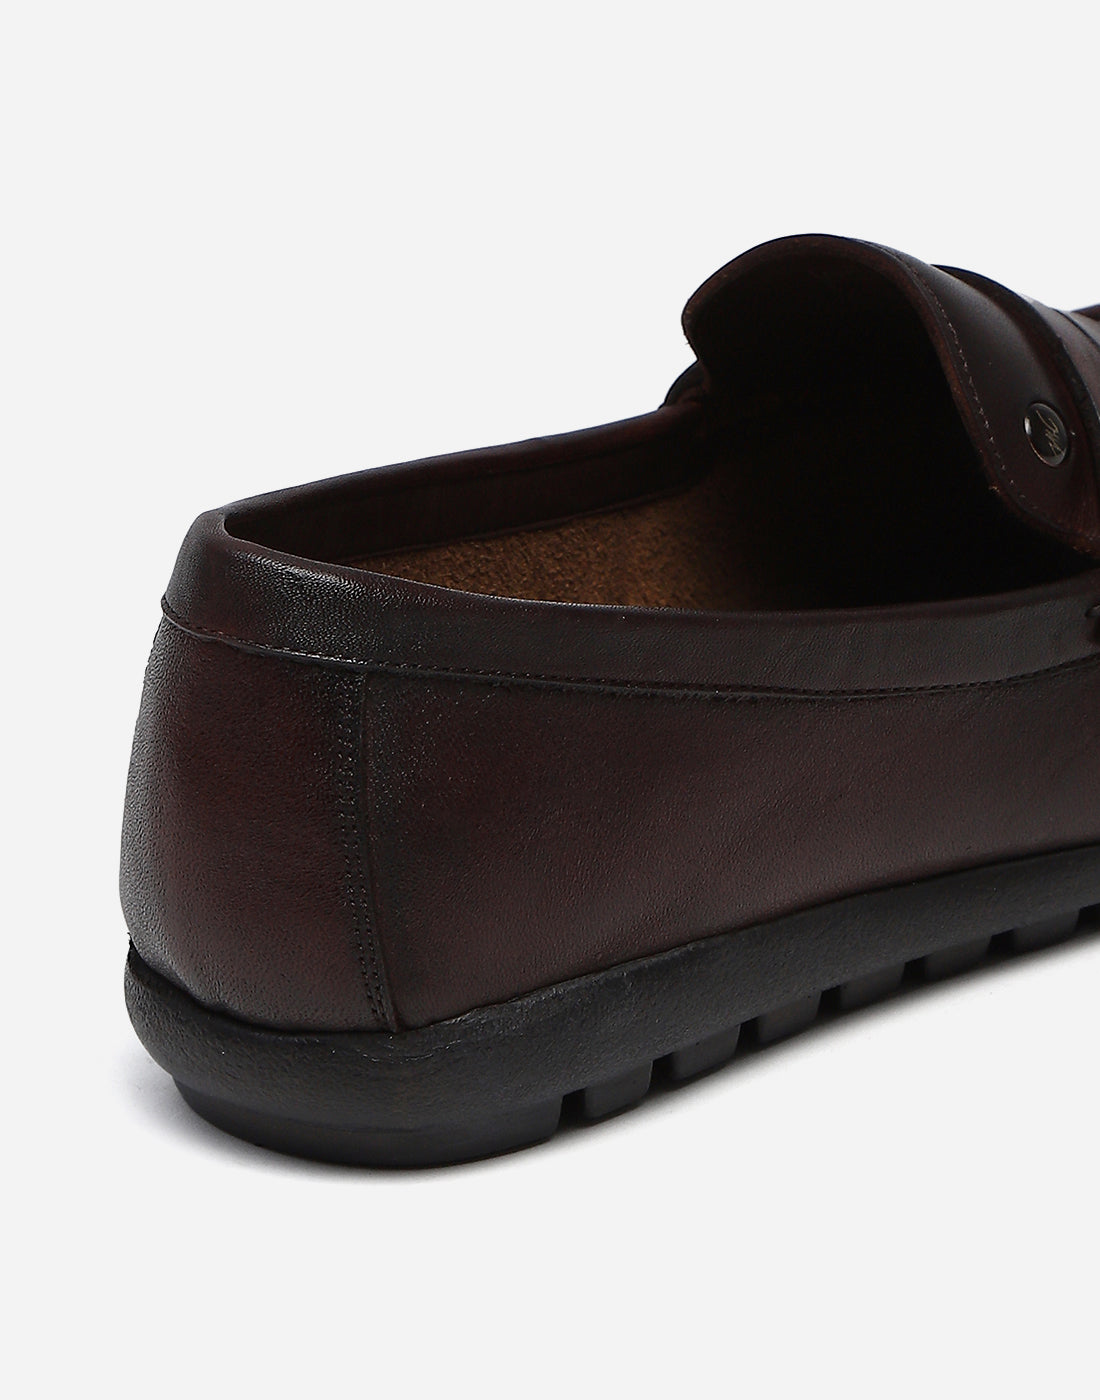 Men Brown Slip on Genuine Leather Penny Loafers